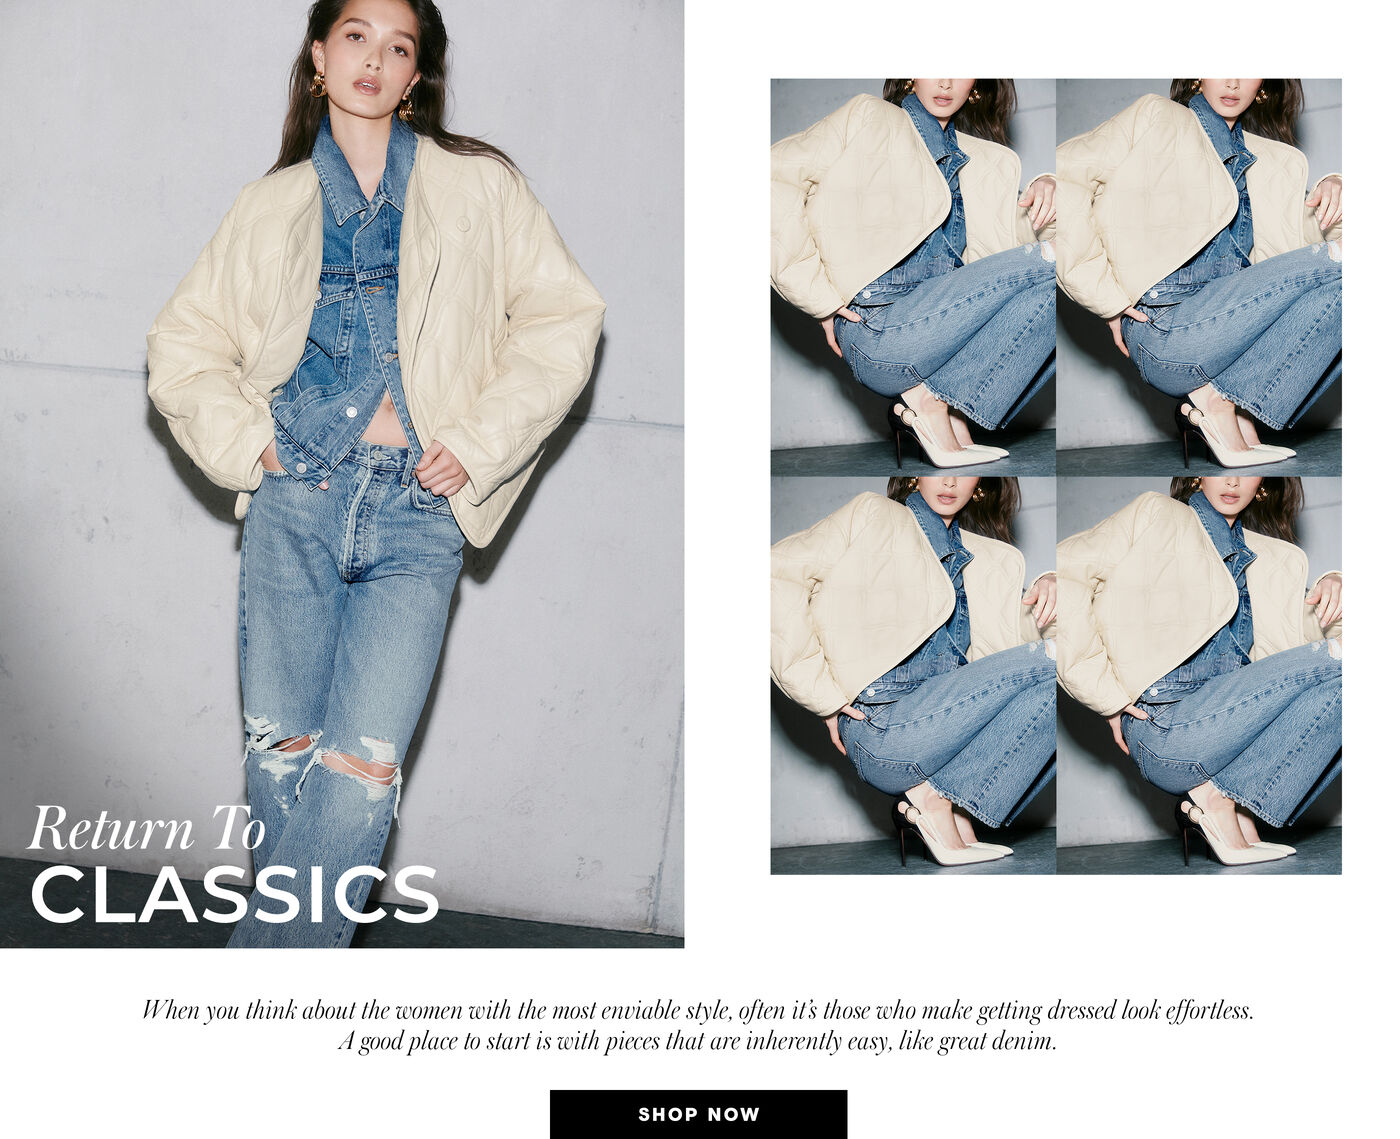 "RETURN TO CLASSICS  When you think about the women with the most enviable style, often it’s those who make getting dressed look effortless. A good place to start is with pieces that are inherently easy, like great denim."